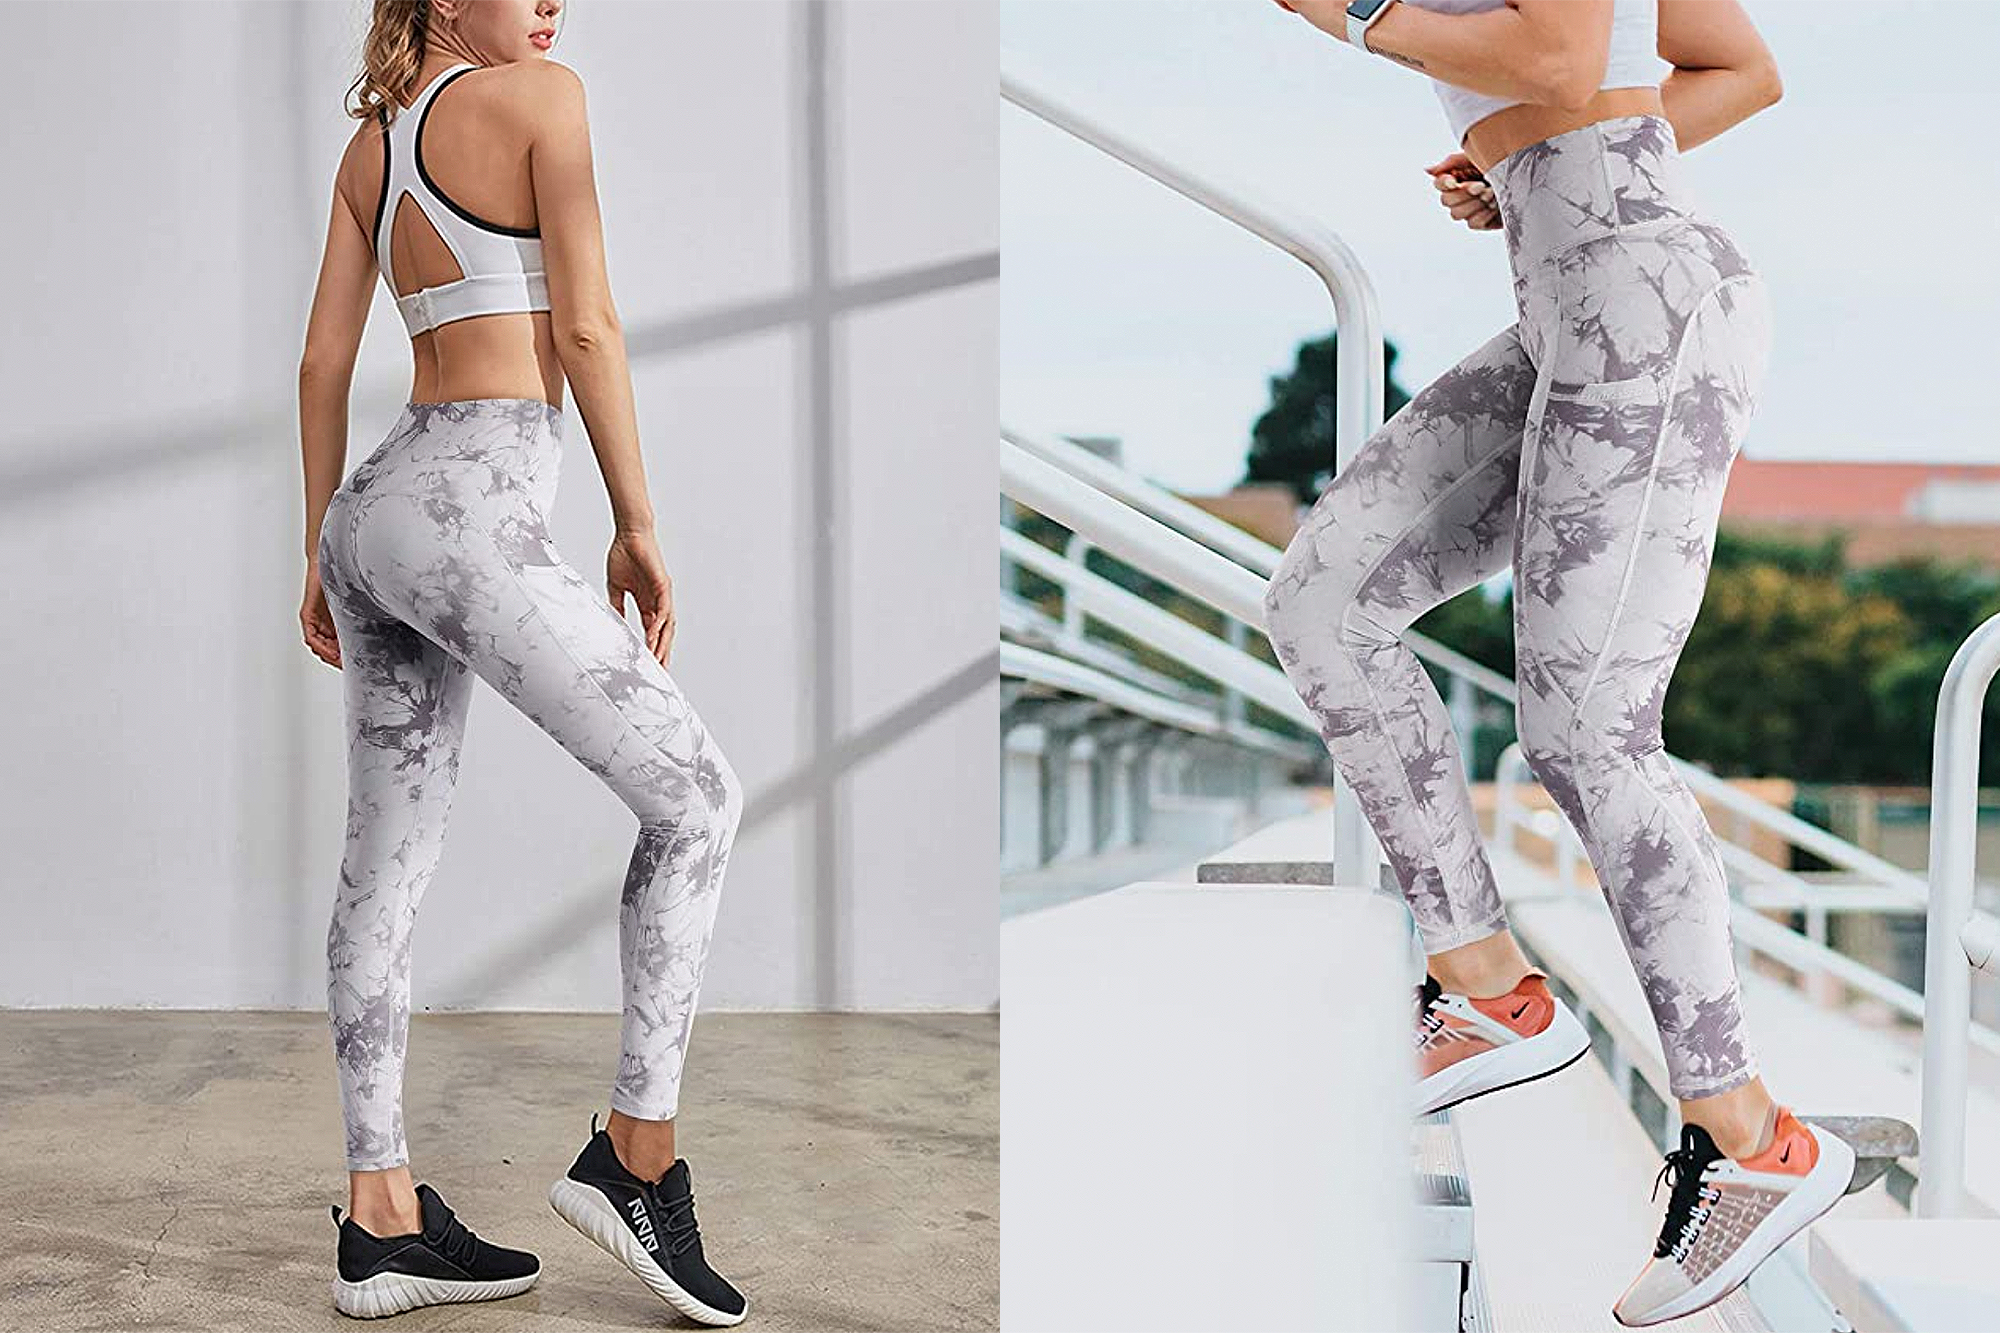 G4Free Bestselling Leggings Will Get You Moving in 2021